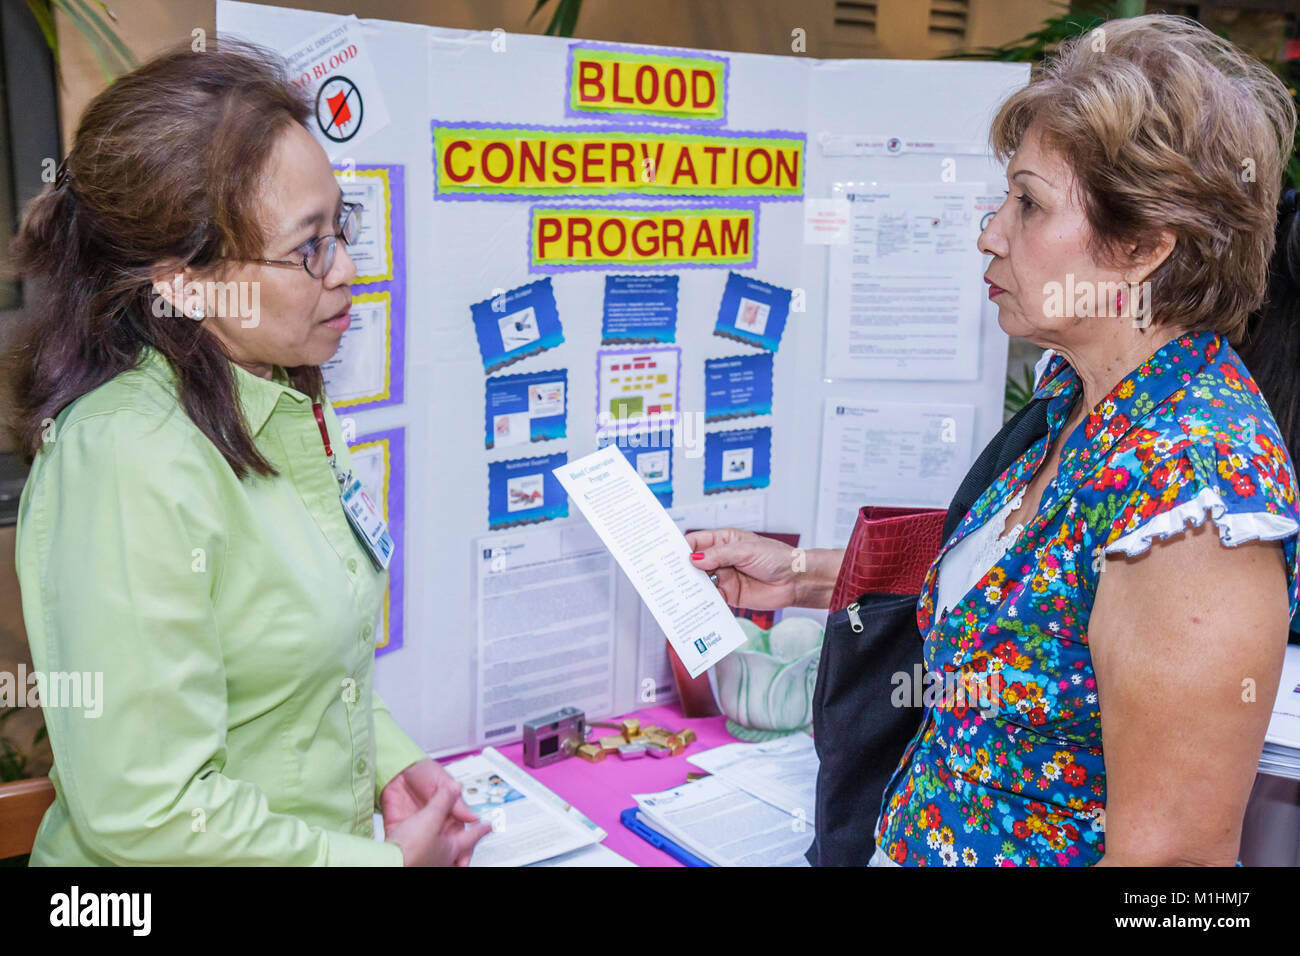 Miami Florida,Kendall,Baptist Health South Florida Hospital,healthcare,woman's,woman's,men's Health Day,community event,medical,education,information, Stock Photo